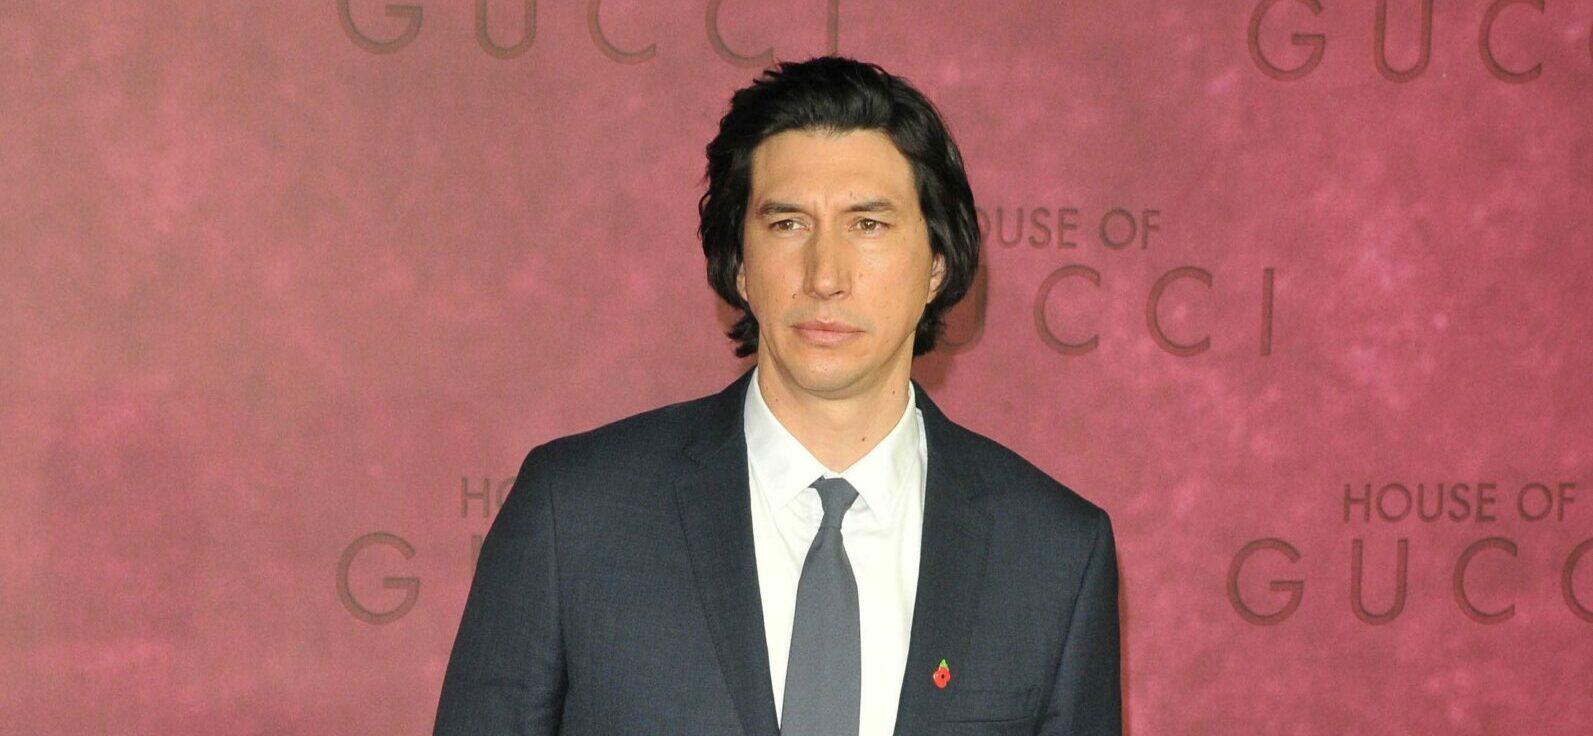 Adam Driver at the "House of Gucci" UK film premiere, Odeon Luxe Leicester Square, Leicester Square, on Tuesday 09 November 2021 in London, England, UK.